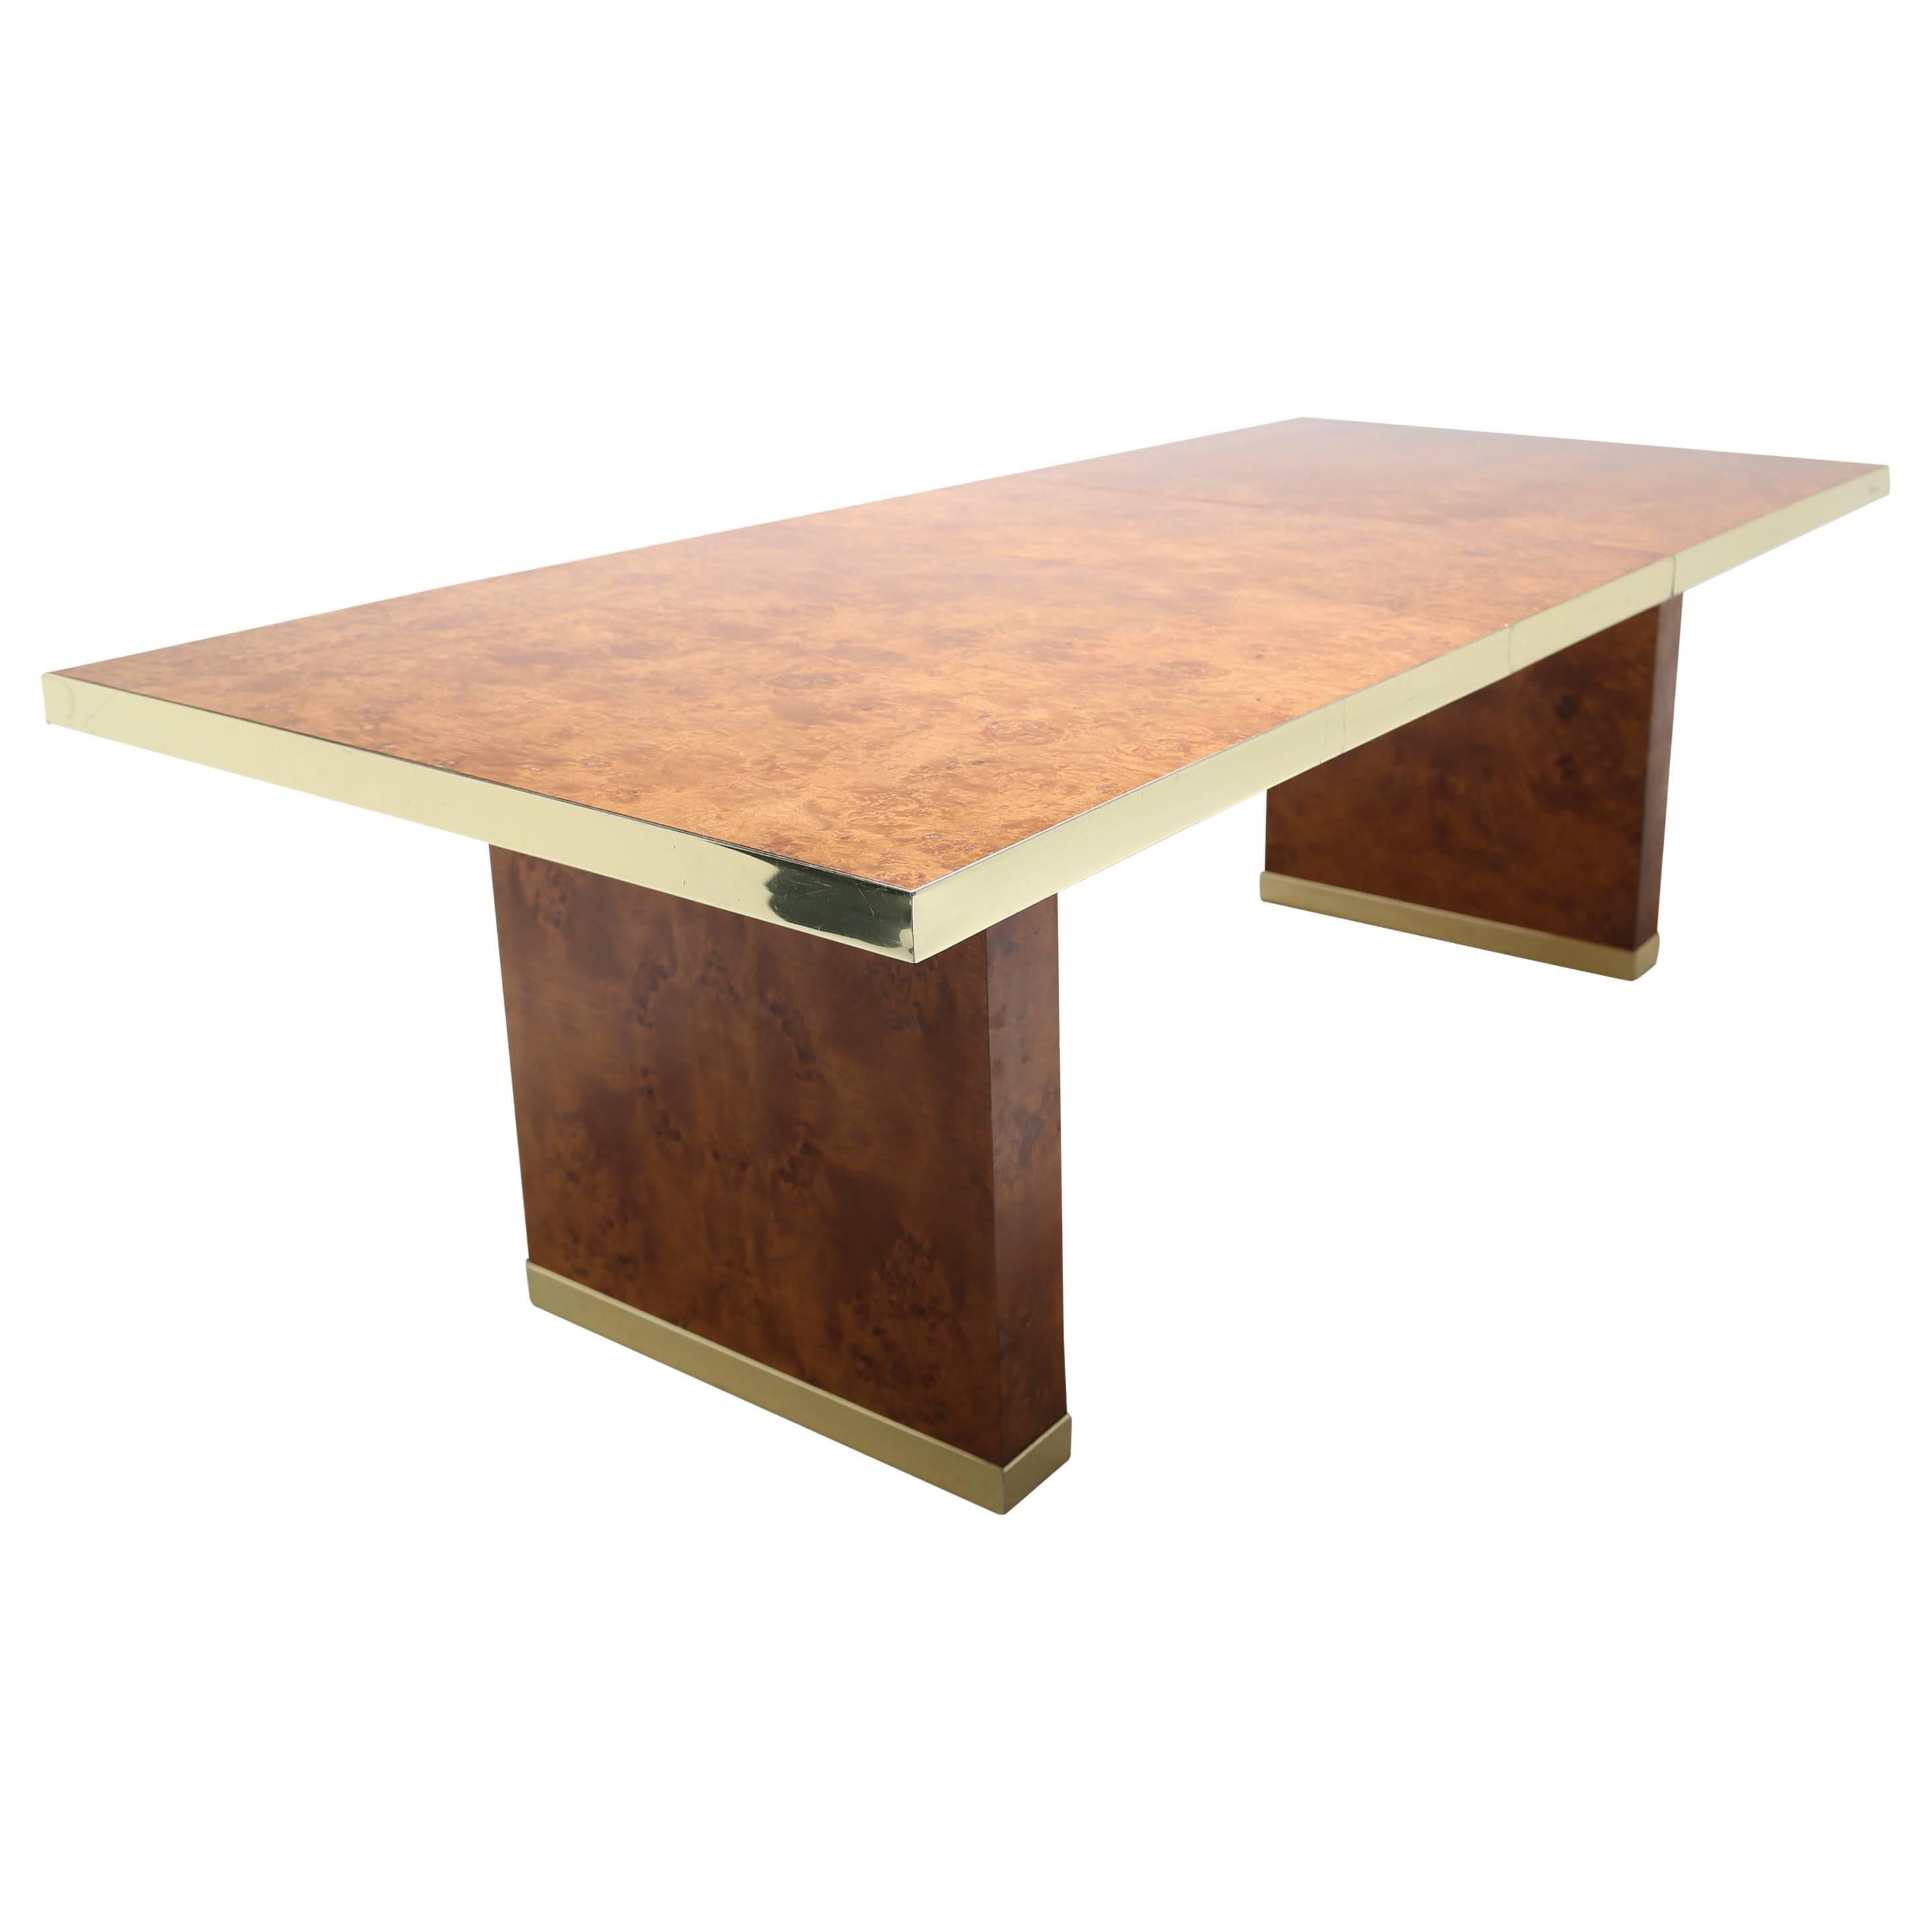 Pierre Cardin signed burlwood and brass extending mid century dining table, 1970s For Sale